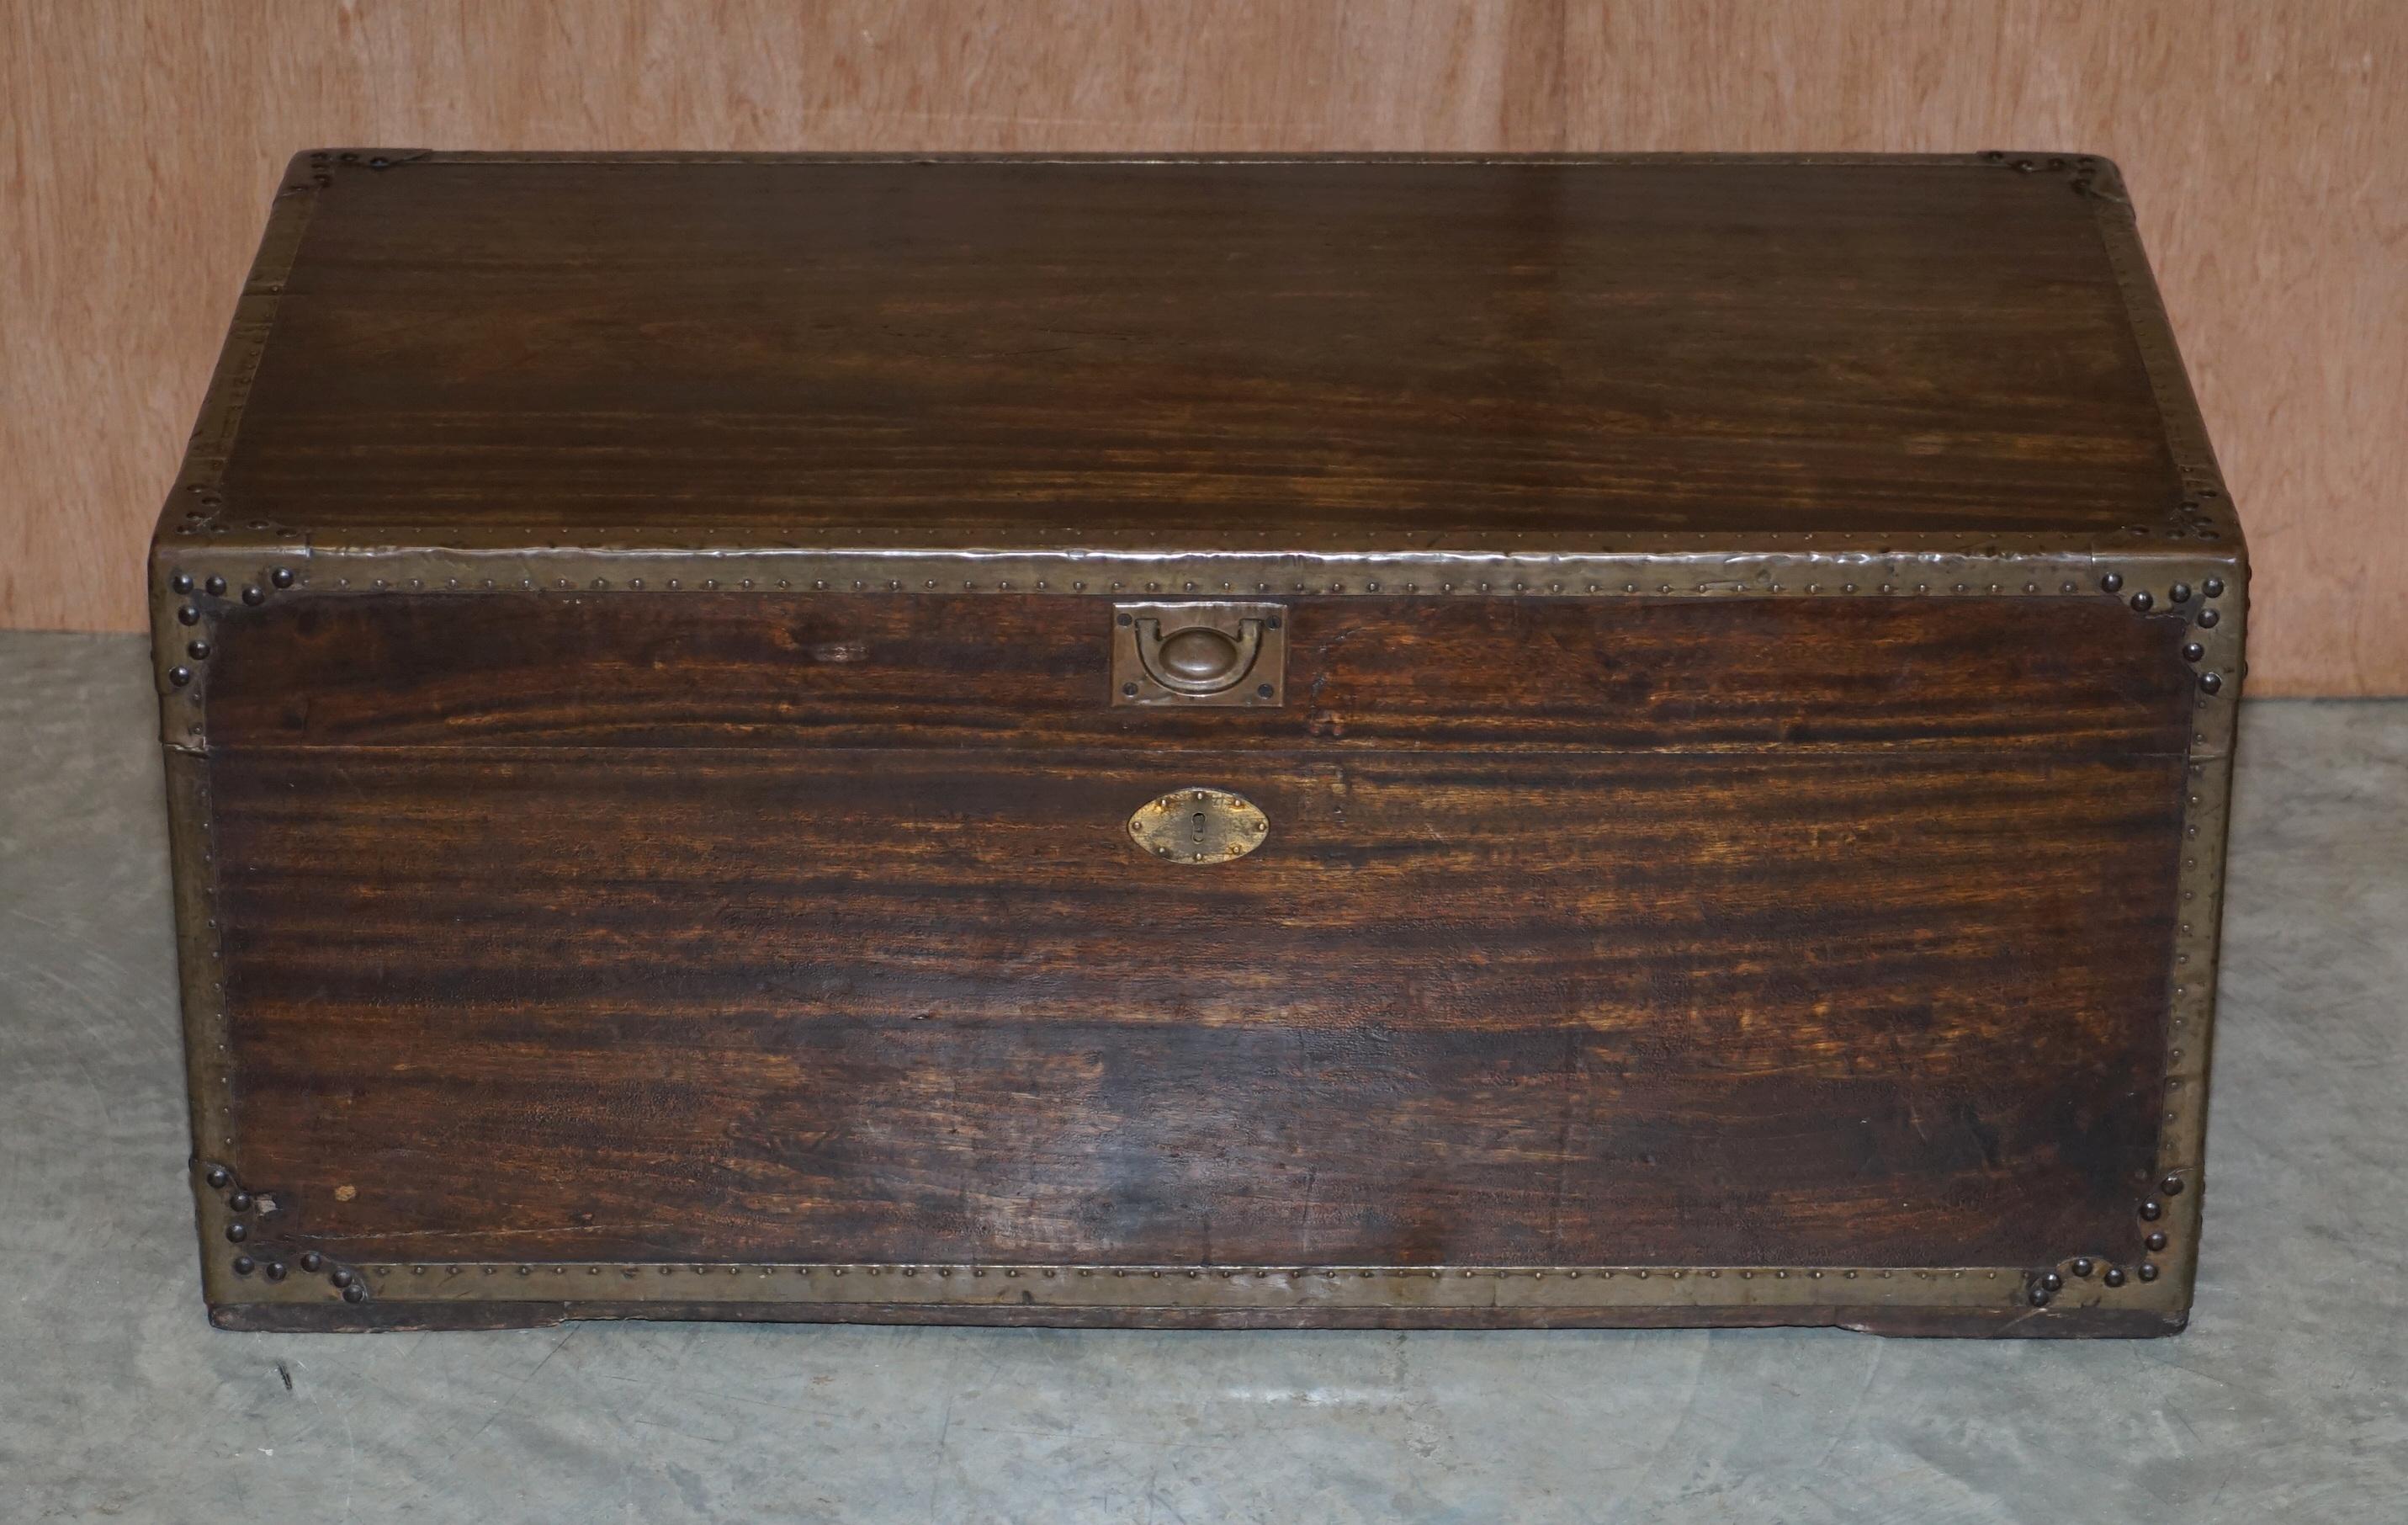 We are delighted to offer for sale this lovely original circa 1880 Anglo-Indian Camphor wood Military Campaign chest which can be used as a coffee table

A very good looking period piece, the timber is all period Camphor wood, it has metal strap